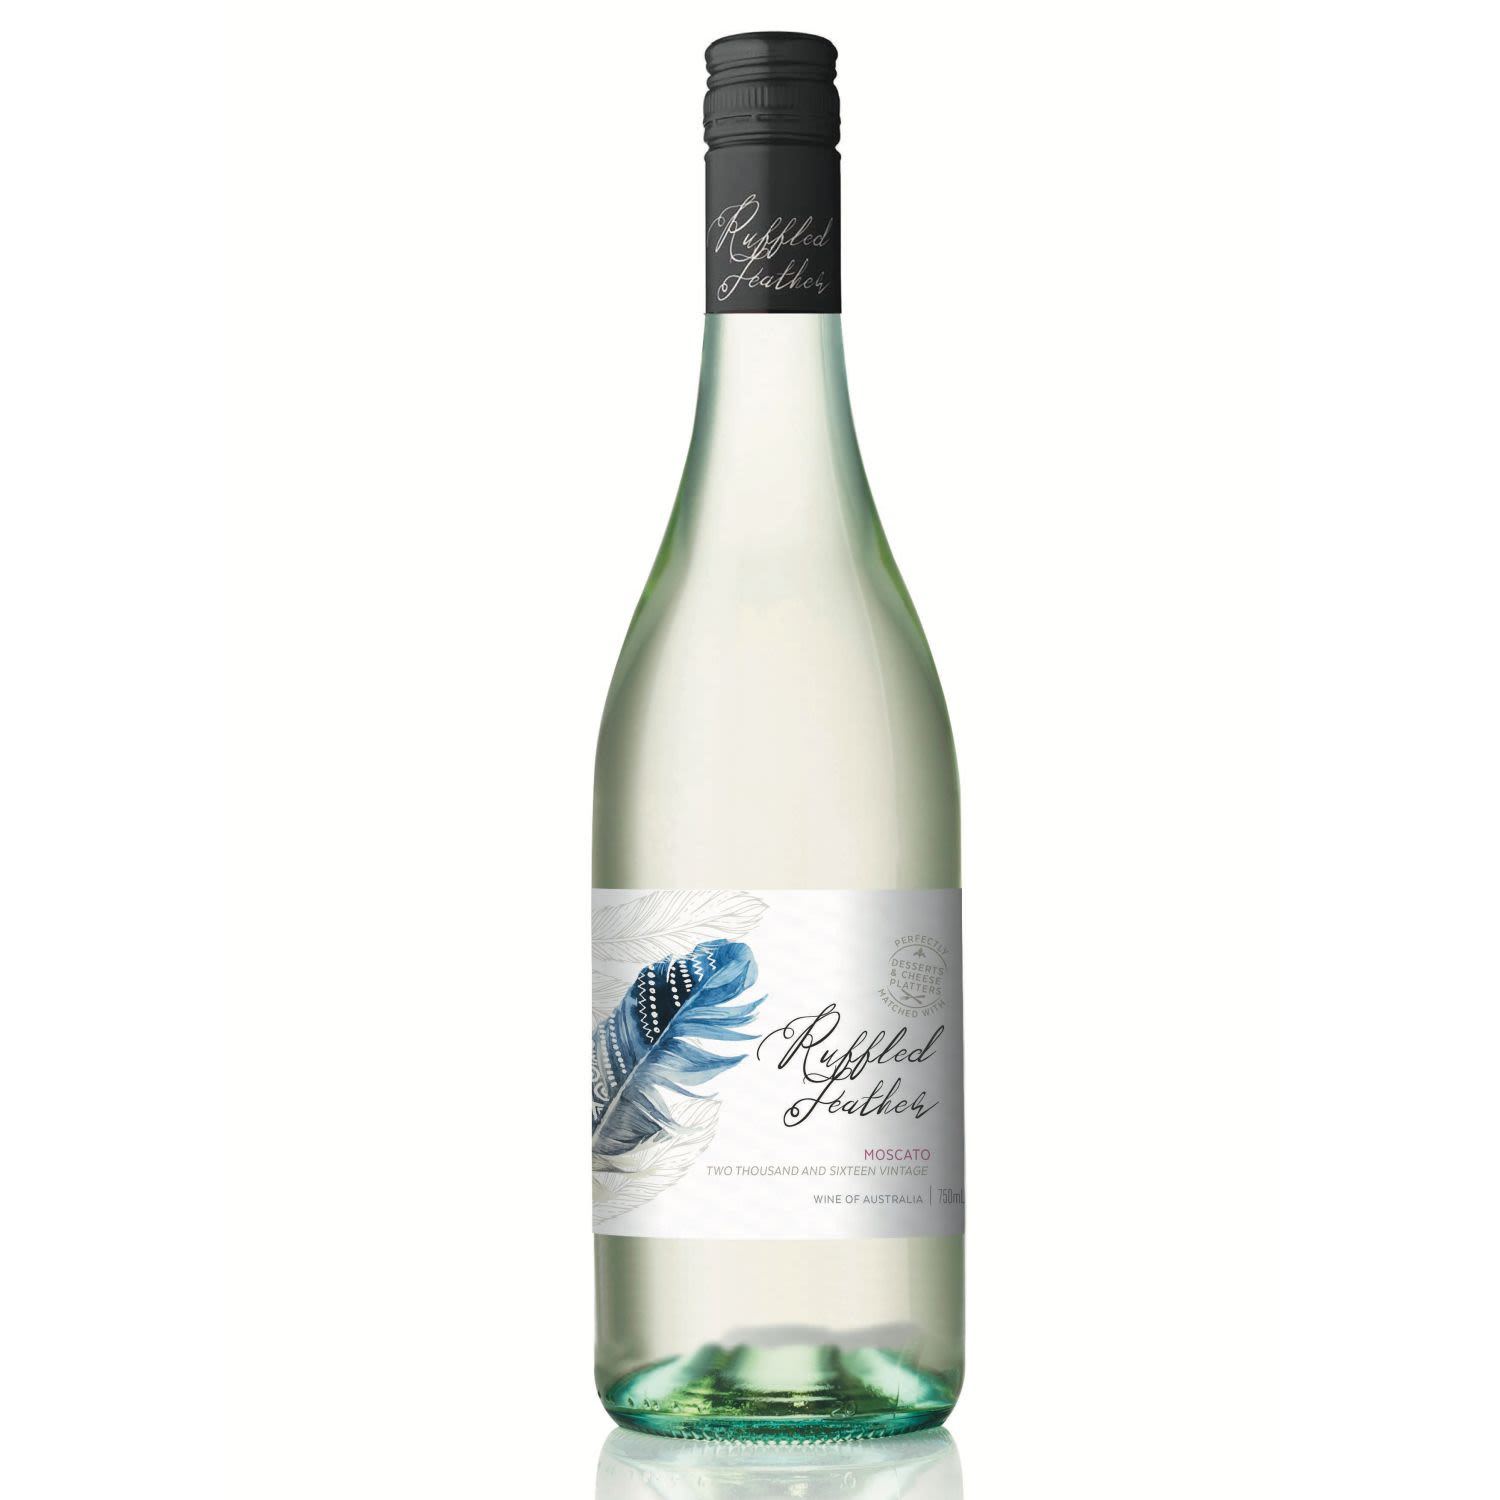 The Ruffled Feather Moscato offers an exciting take on the traditional, with flavours that are refreshing and spritzy. Light and sweet, its lively and fresh taste is a winner for any Moscato lover. The perfect accompaniment to spicy cuisine, hard cheese and desserts such as pavlova.<br /> <br />Alcohol Volume: 8.00%<br /><br />Pack Format: 12 Pack<br /><br />Standard Drinks: 4.7</br /><br />Pack Type: Bottle<br /><br />Country of Origin: Australia<br /><br />Region: South Eastern Australia<br /><br />Vintage: Vintages Vary<br />